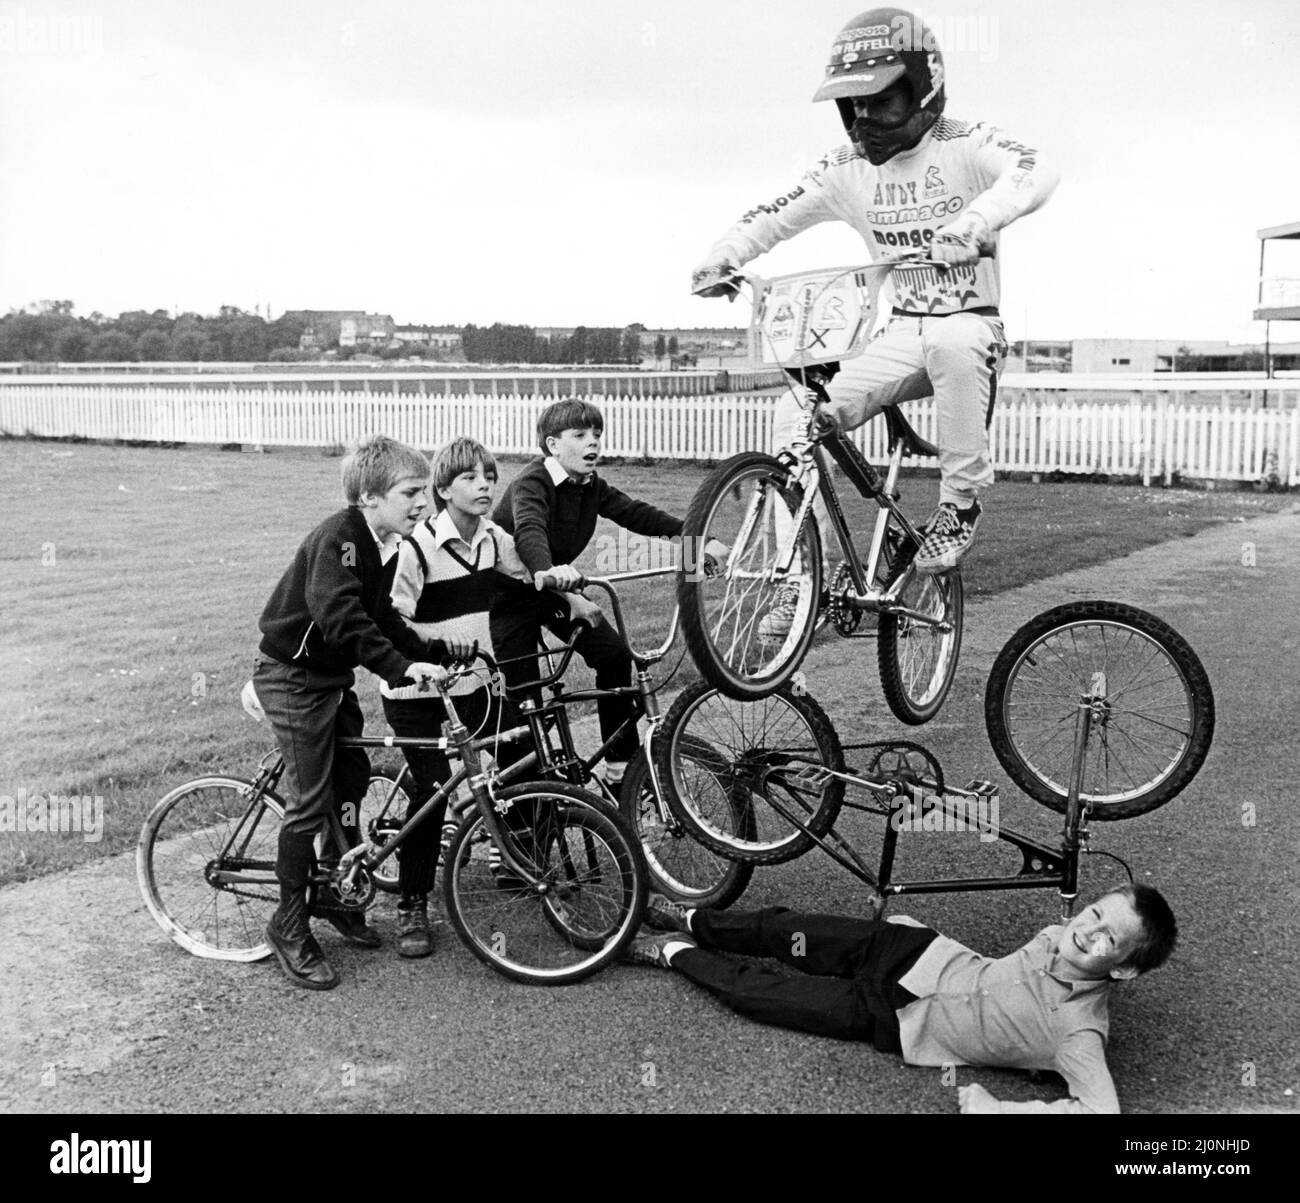 Children practising stunts at Stockton's redundant racecourse. The company running the complex is planning an international standard BMX track, snooker club, golf driving range, funfair, dormitory style accommodation block, an exhibition site and a sunday market. 20th June 1984. Stock Photo